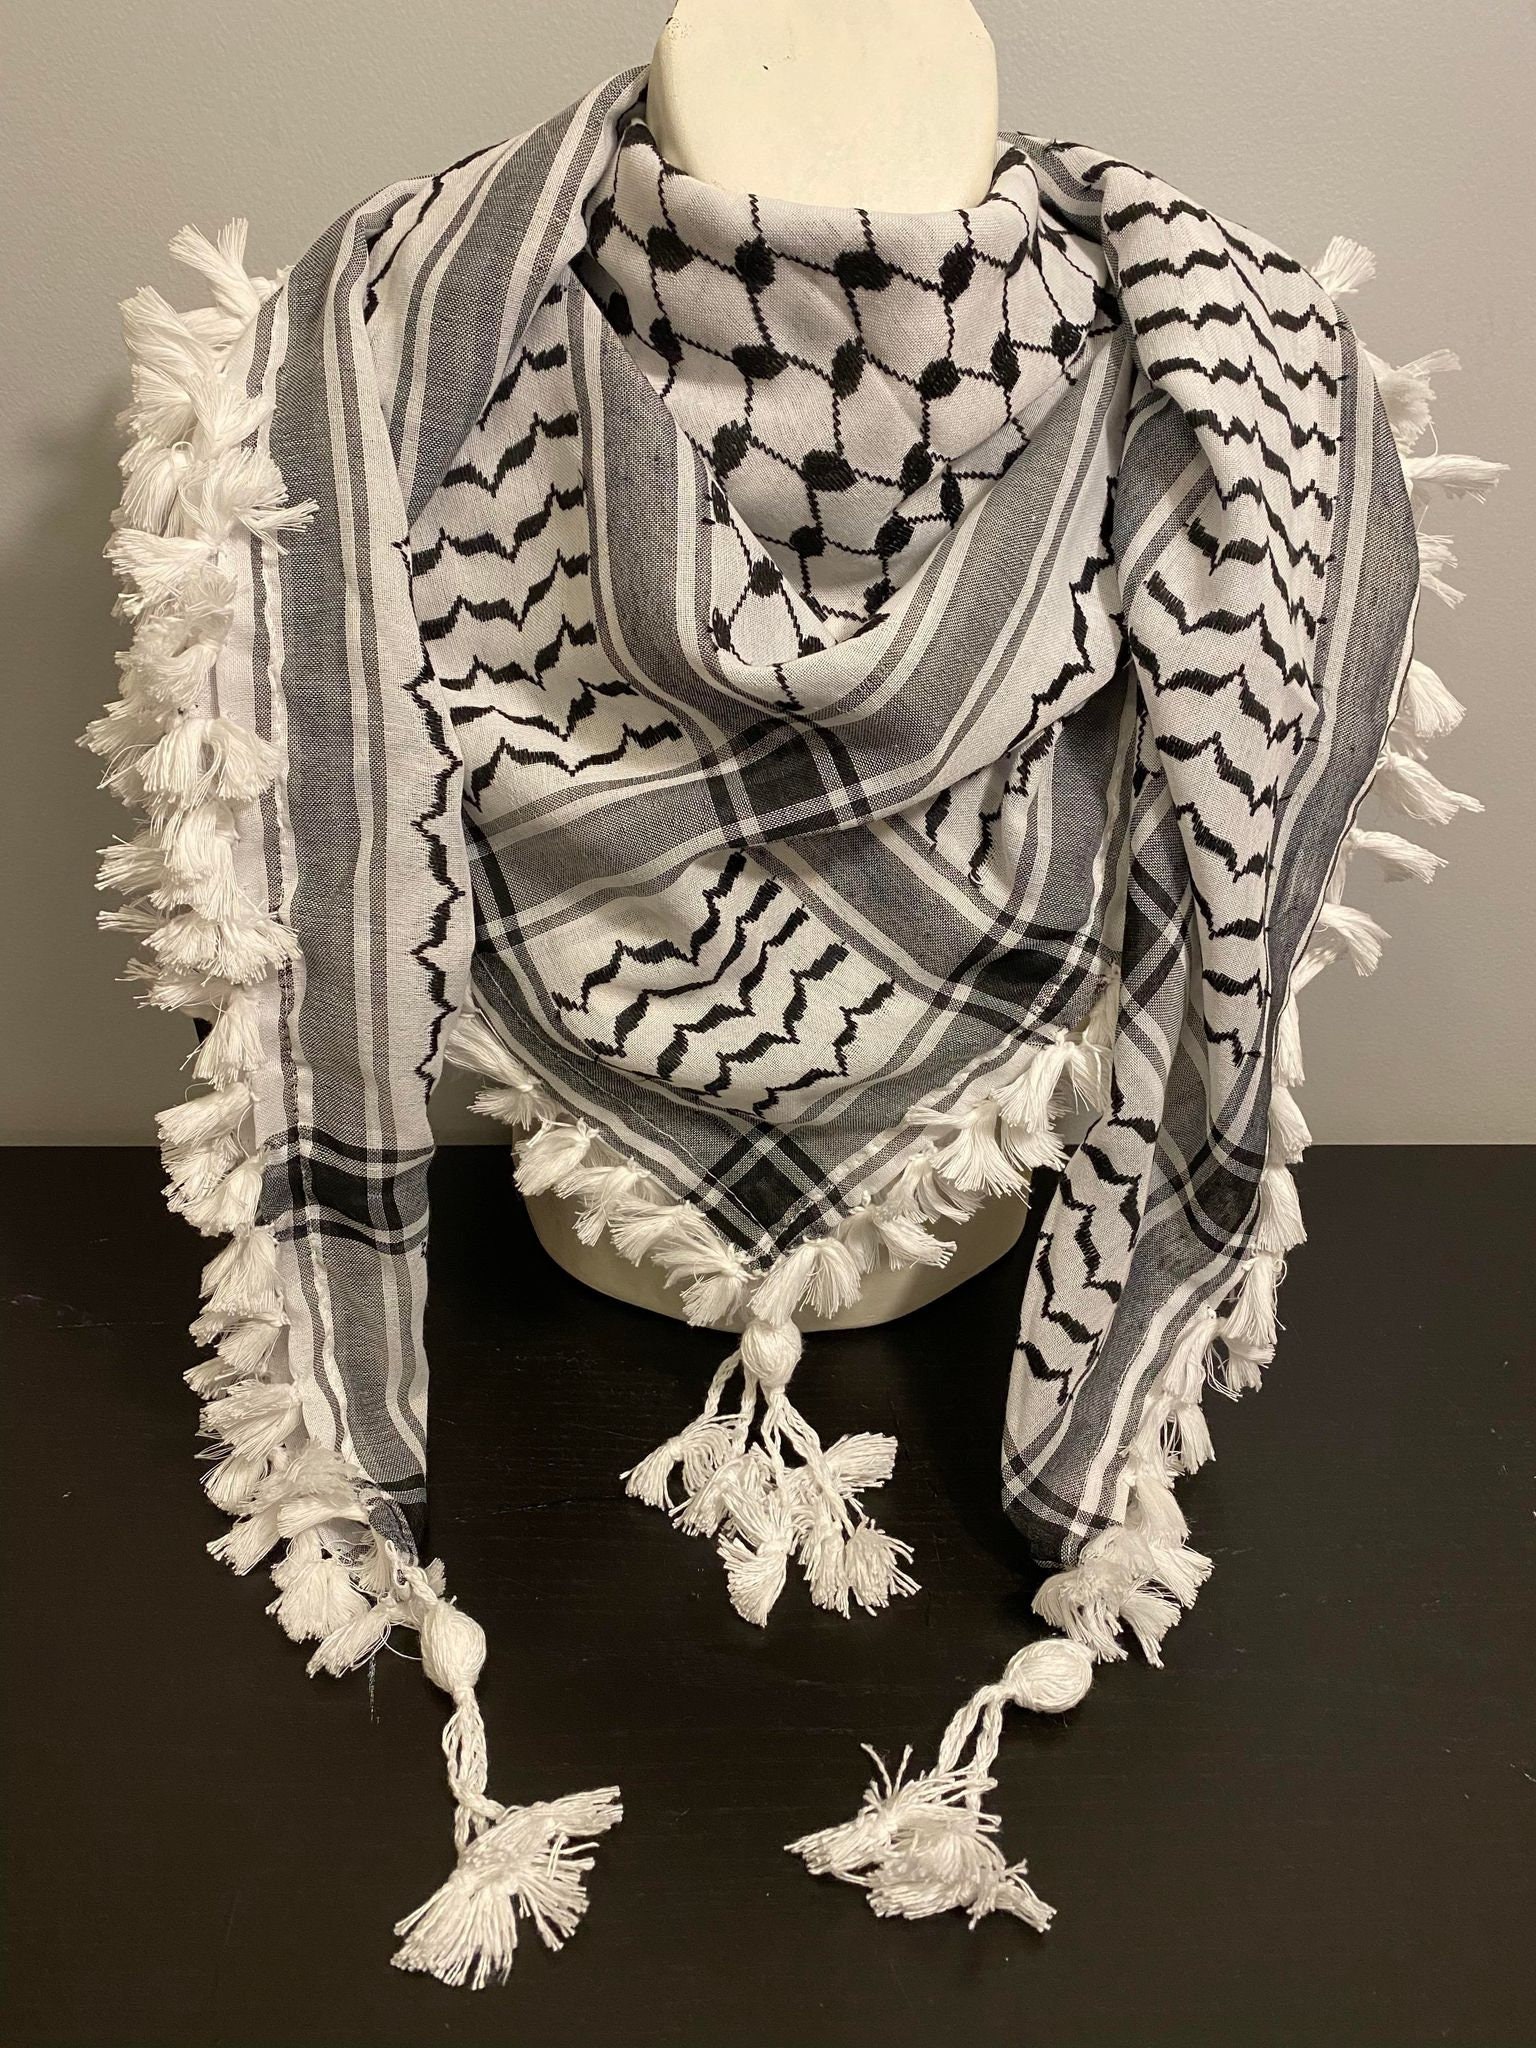 Charity Accessories - Palestinian Keffiyeh - Olive & Yellow